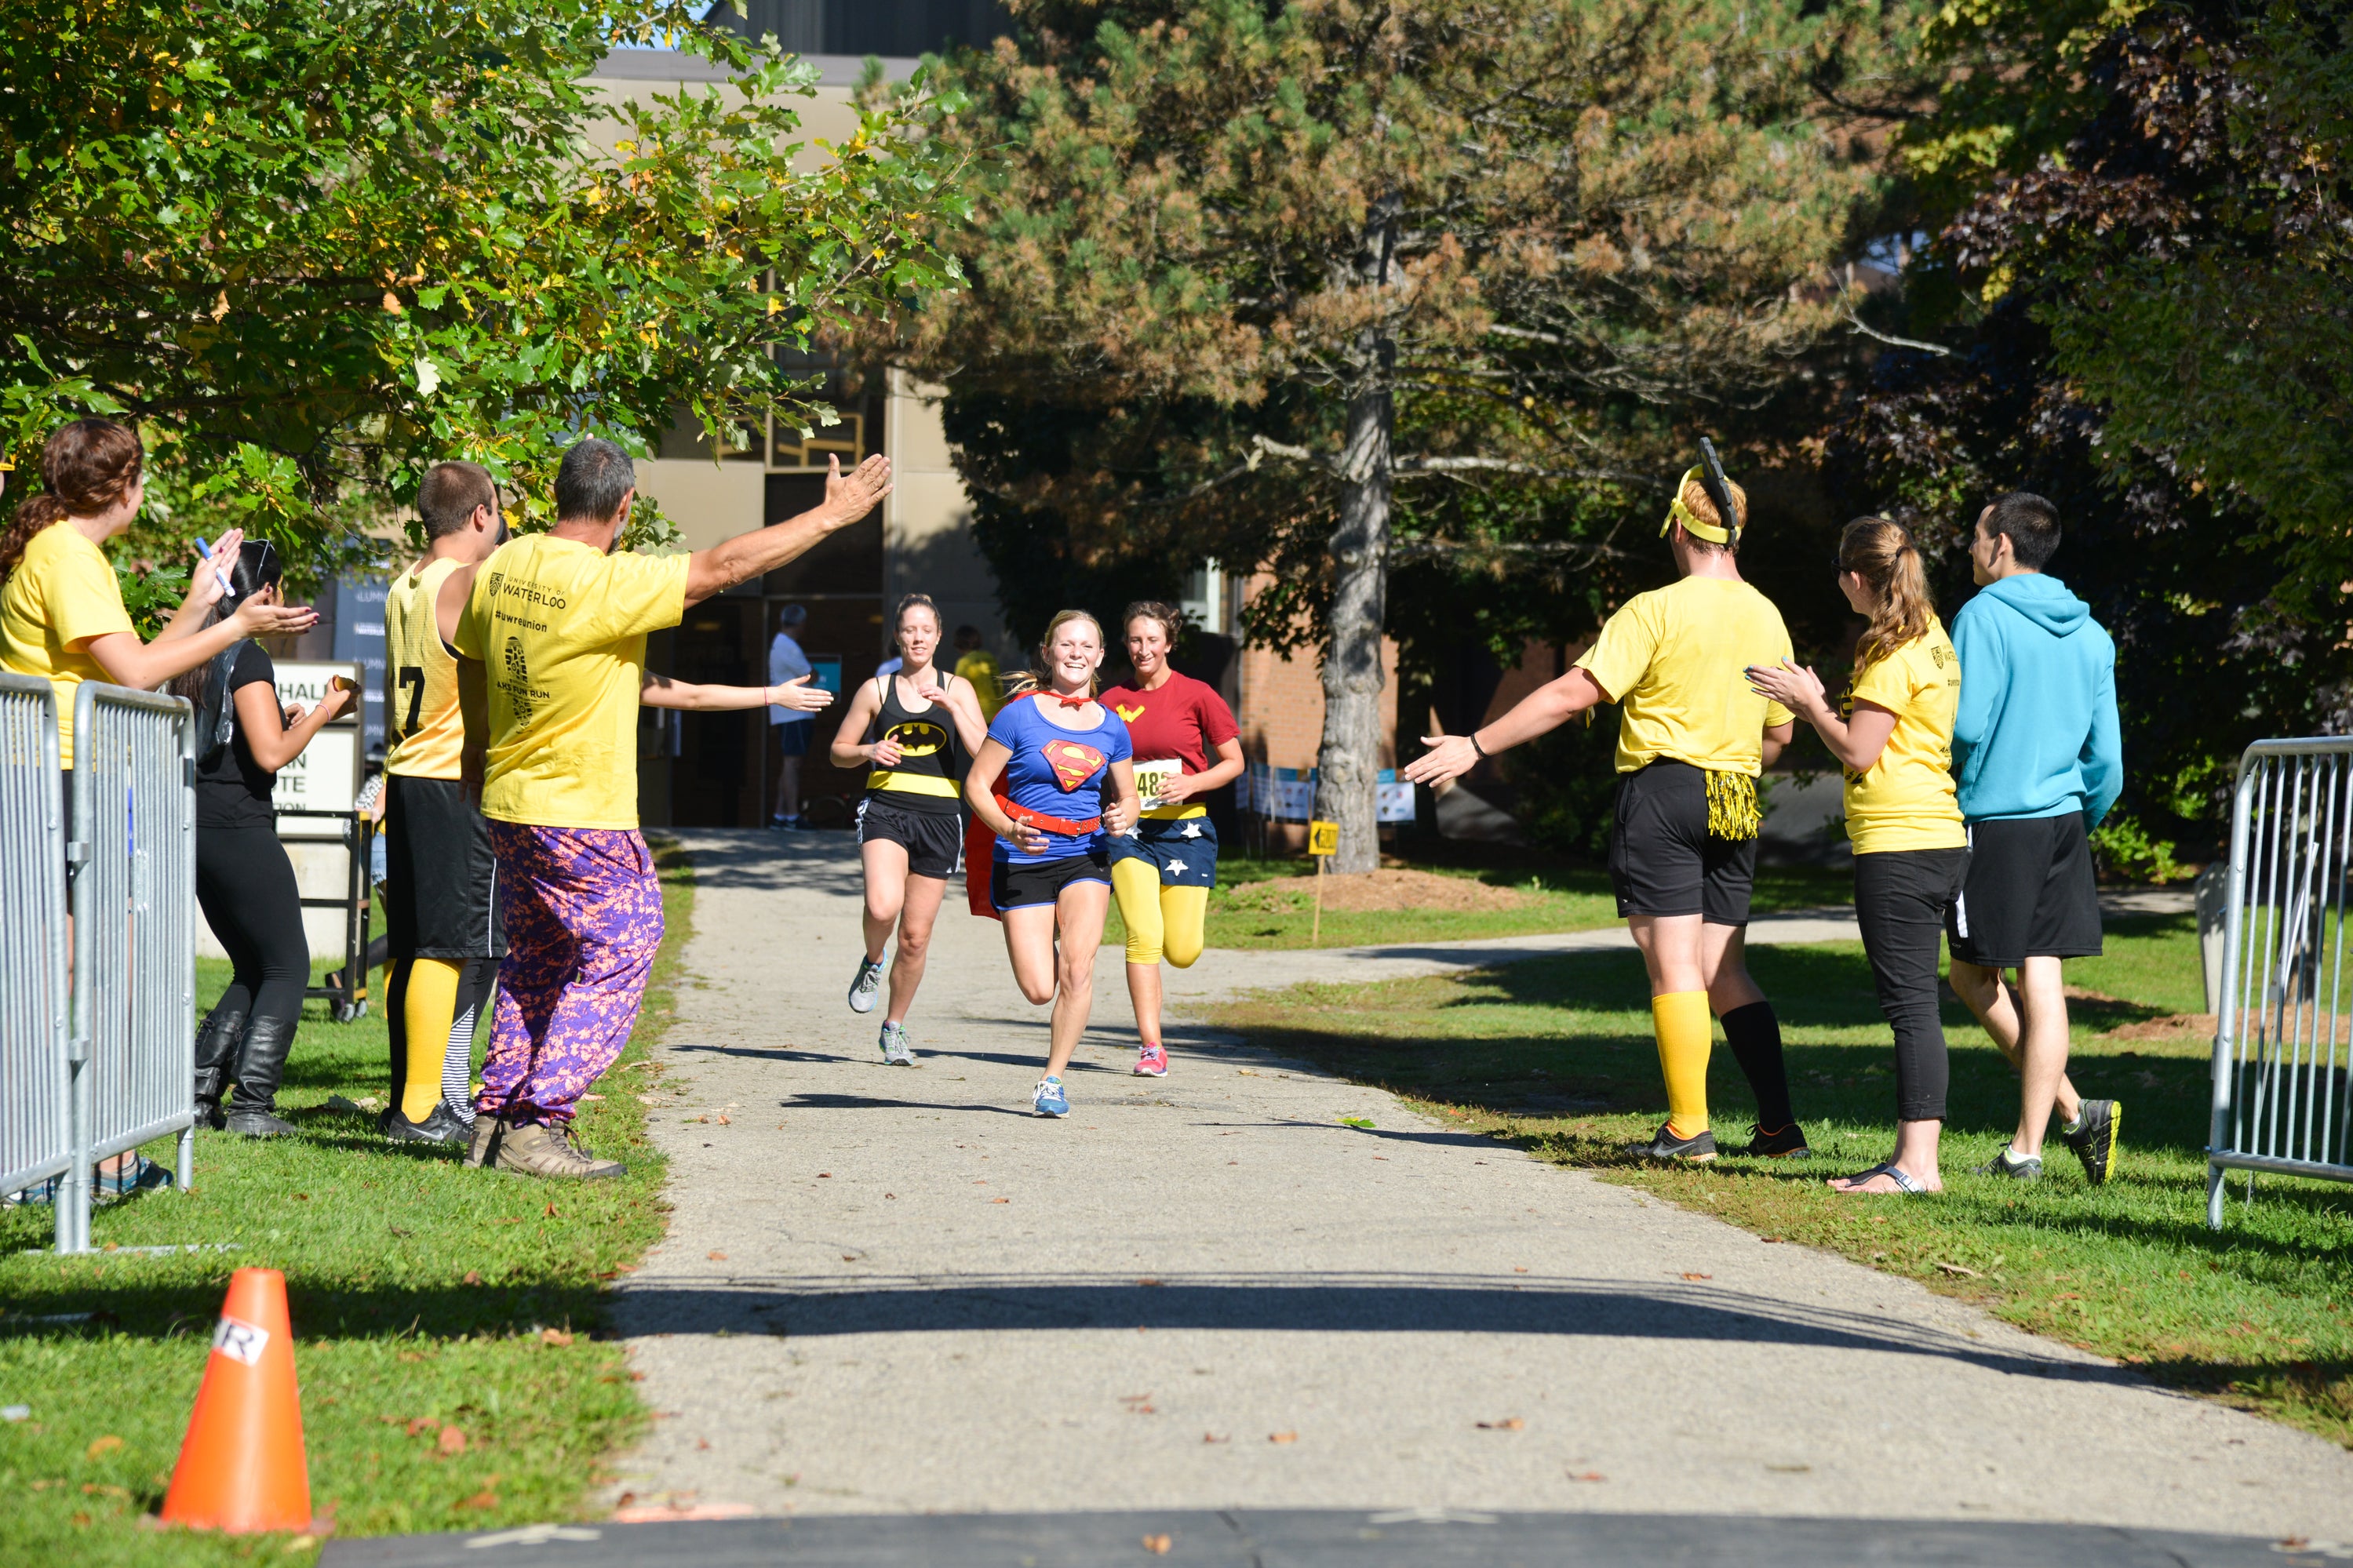 Participants dressed as super heroes passing the finish line